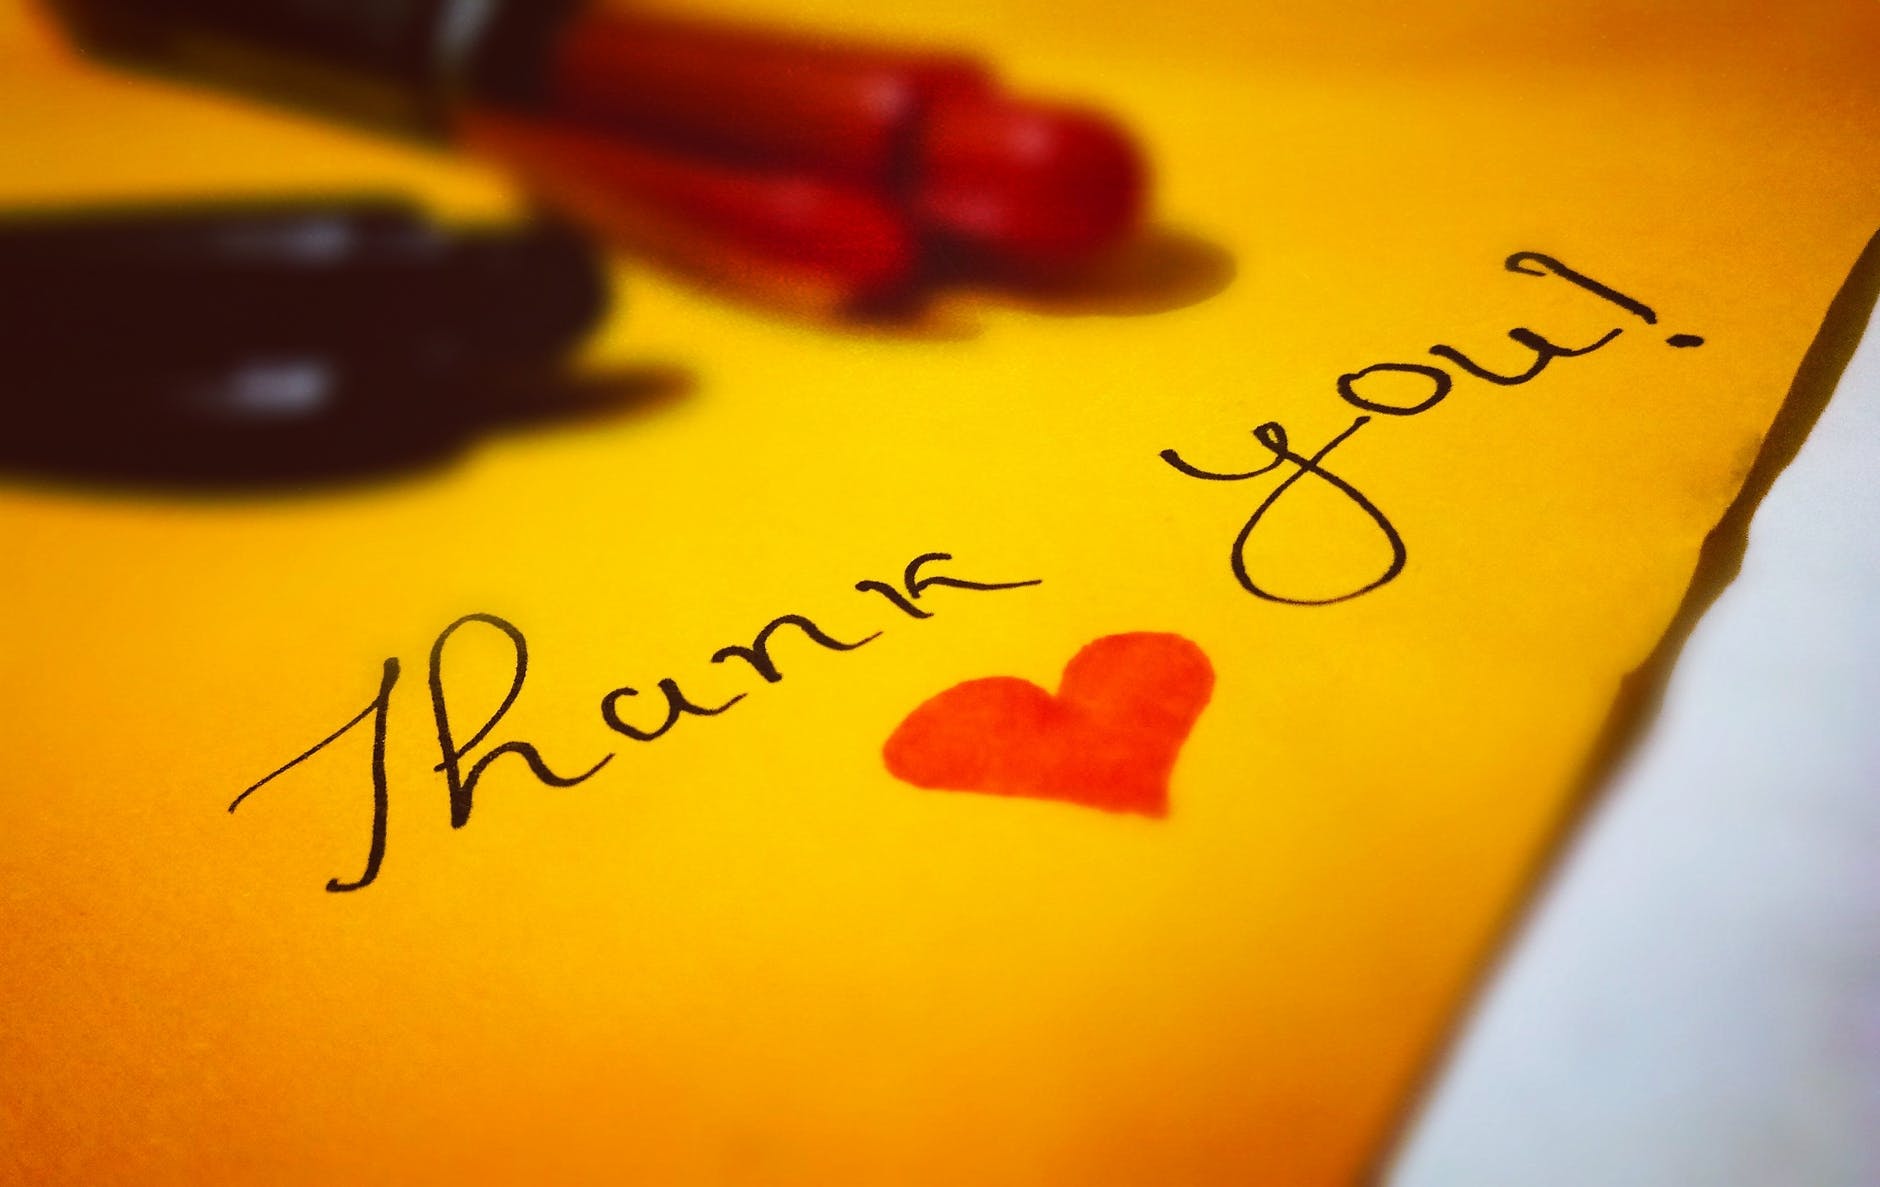 The words Thank You written in cursive on yellow paper with a black pen. There is a red heart drawn below the script, and the pen is resting on the upper part of the page.